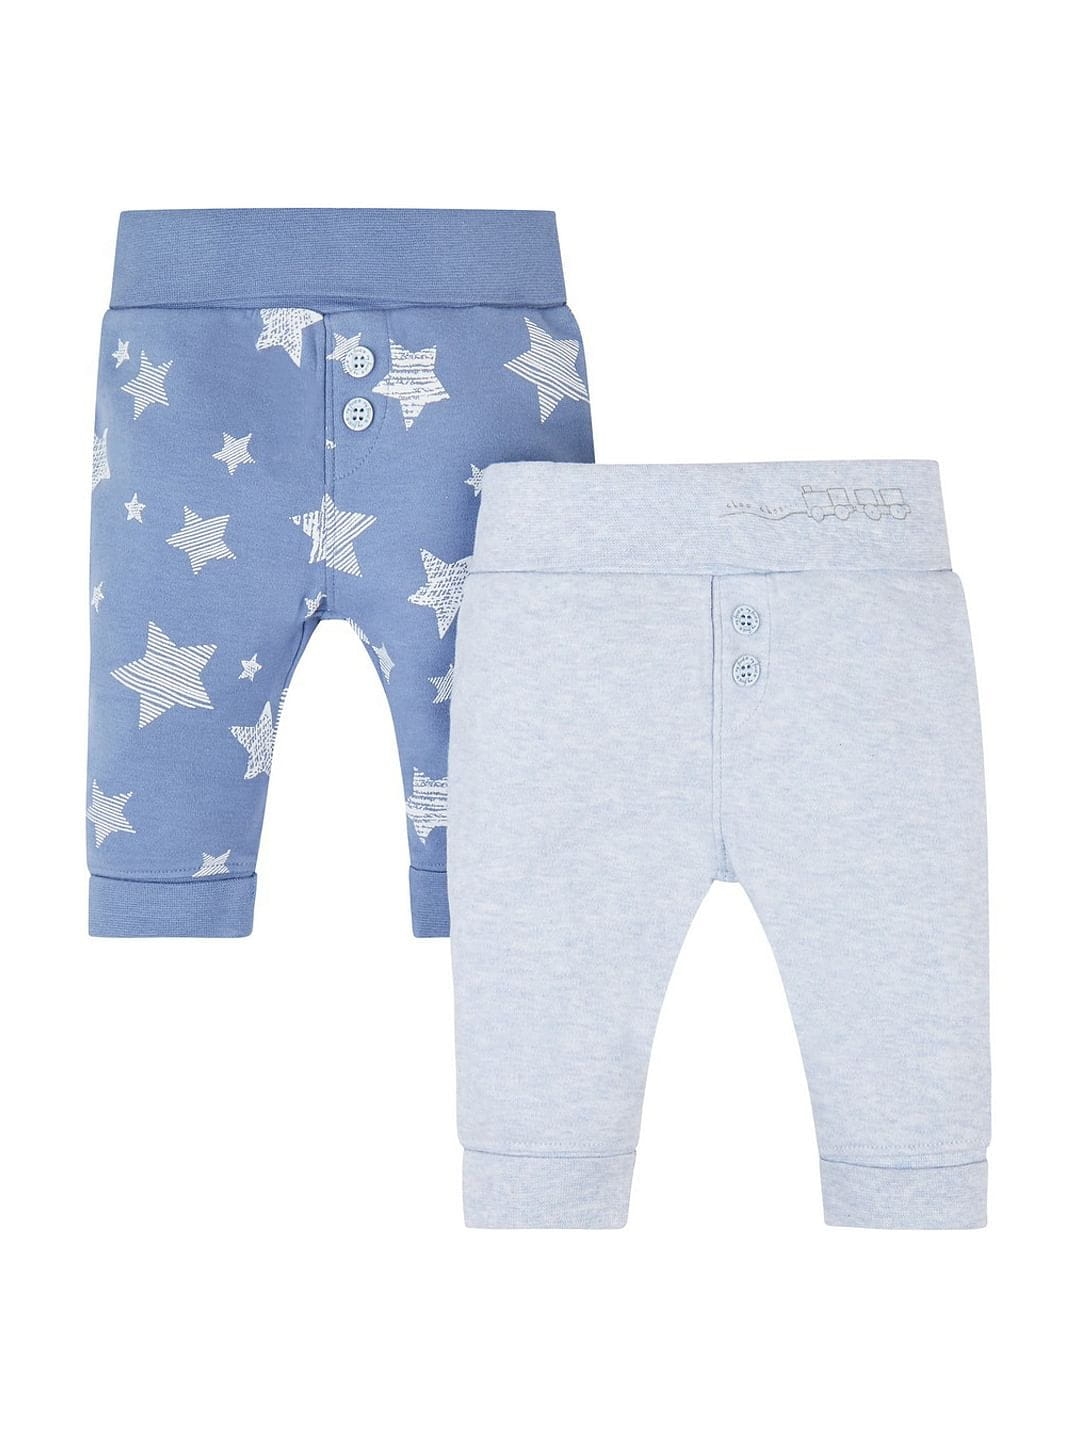 Mothercare | My First Blue Leggings - 2 Pack 0